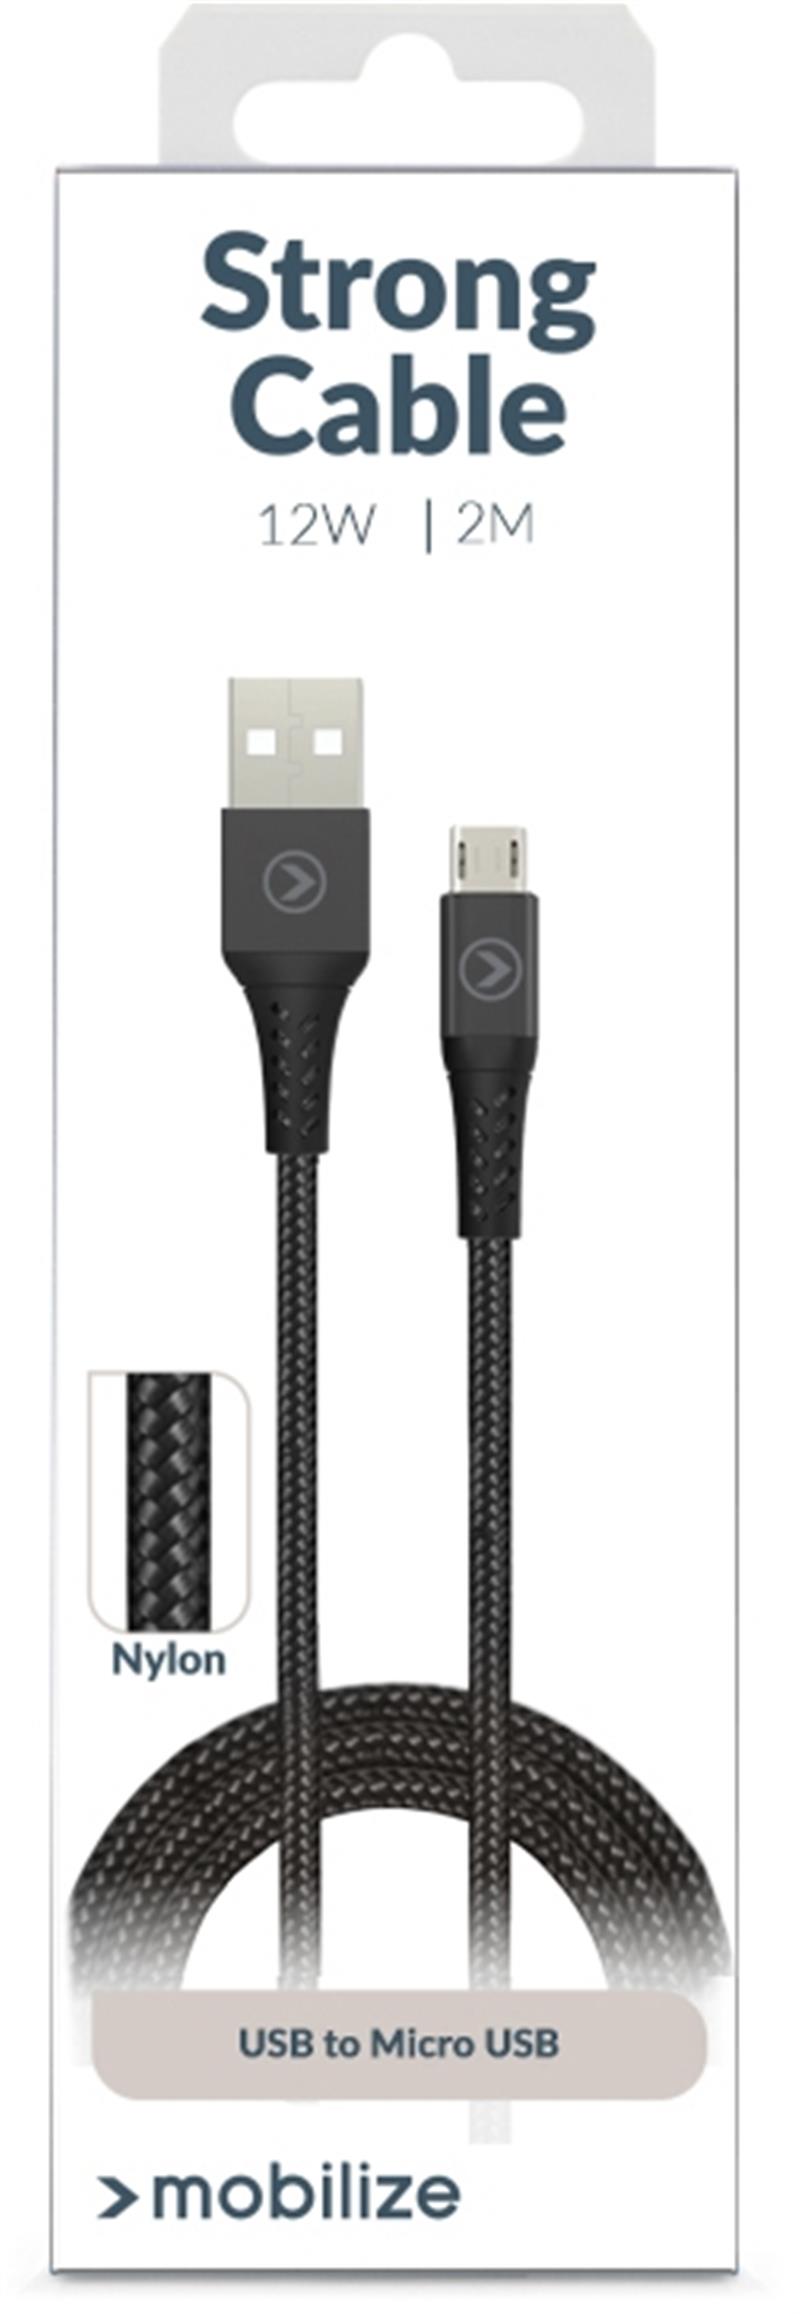 Mobilize Strong Nylon Cable USB to Micro USB 2m 12W Black